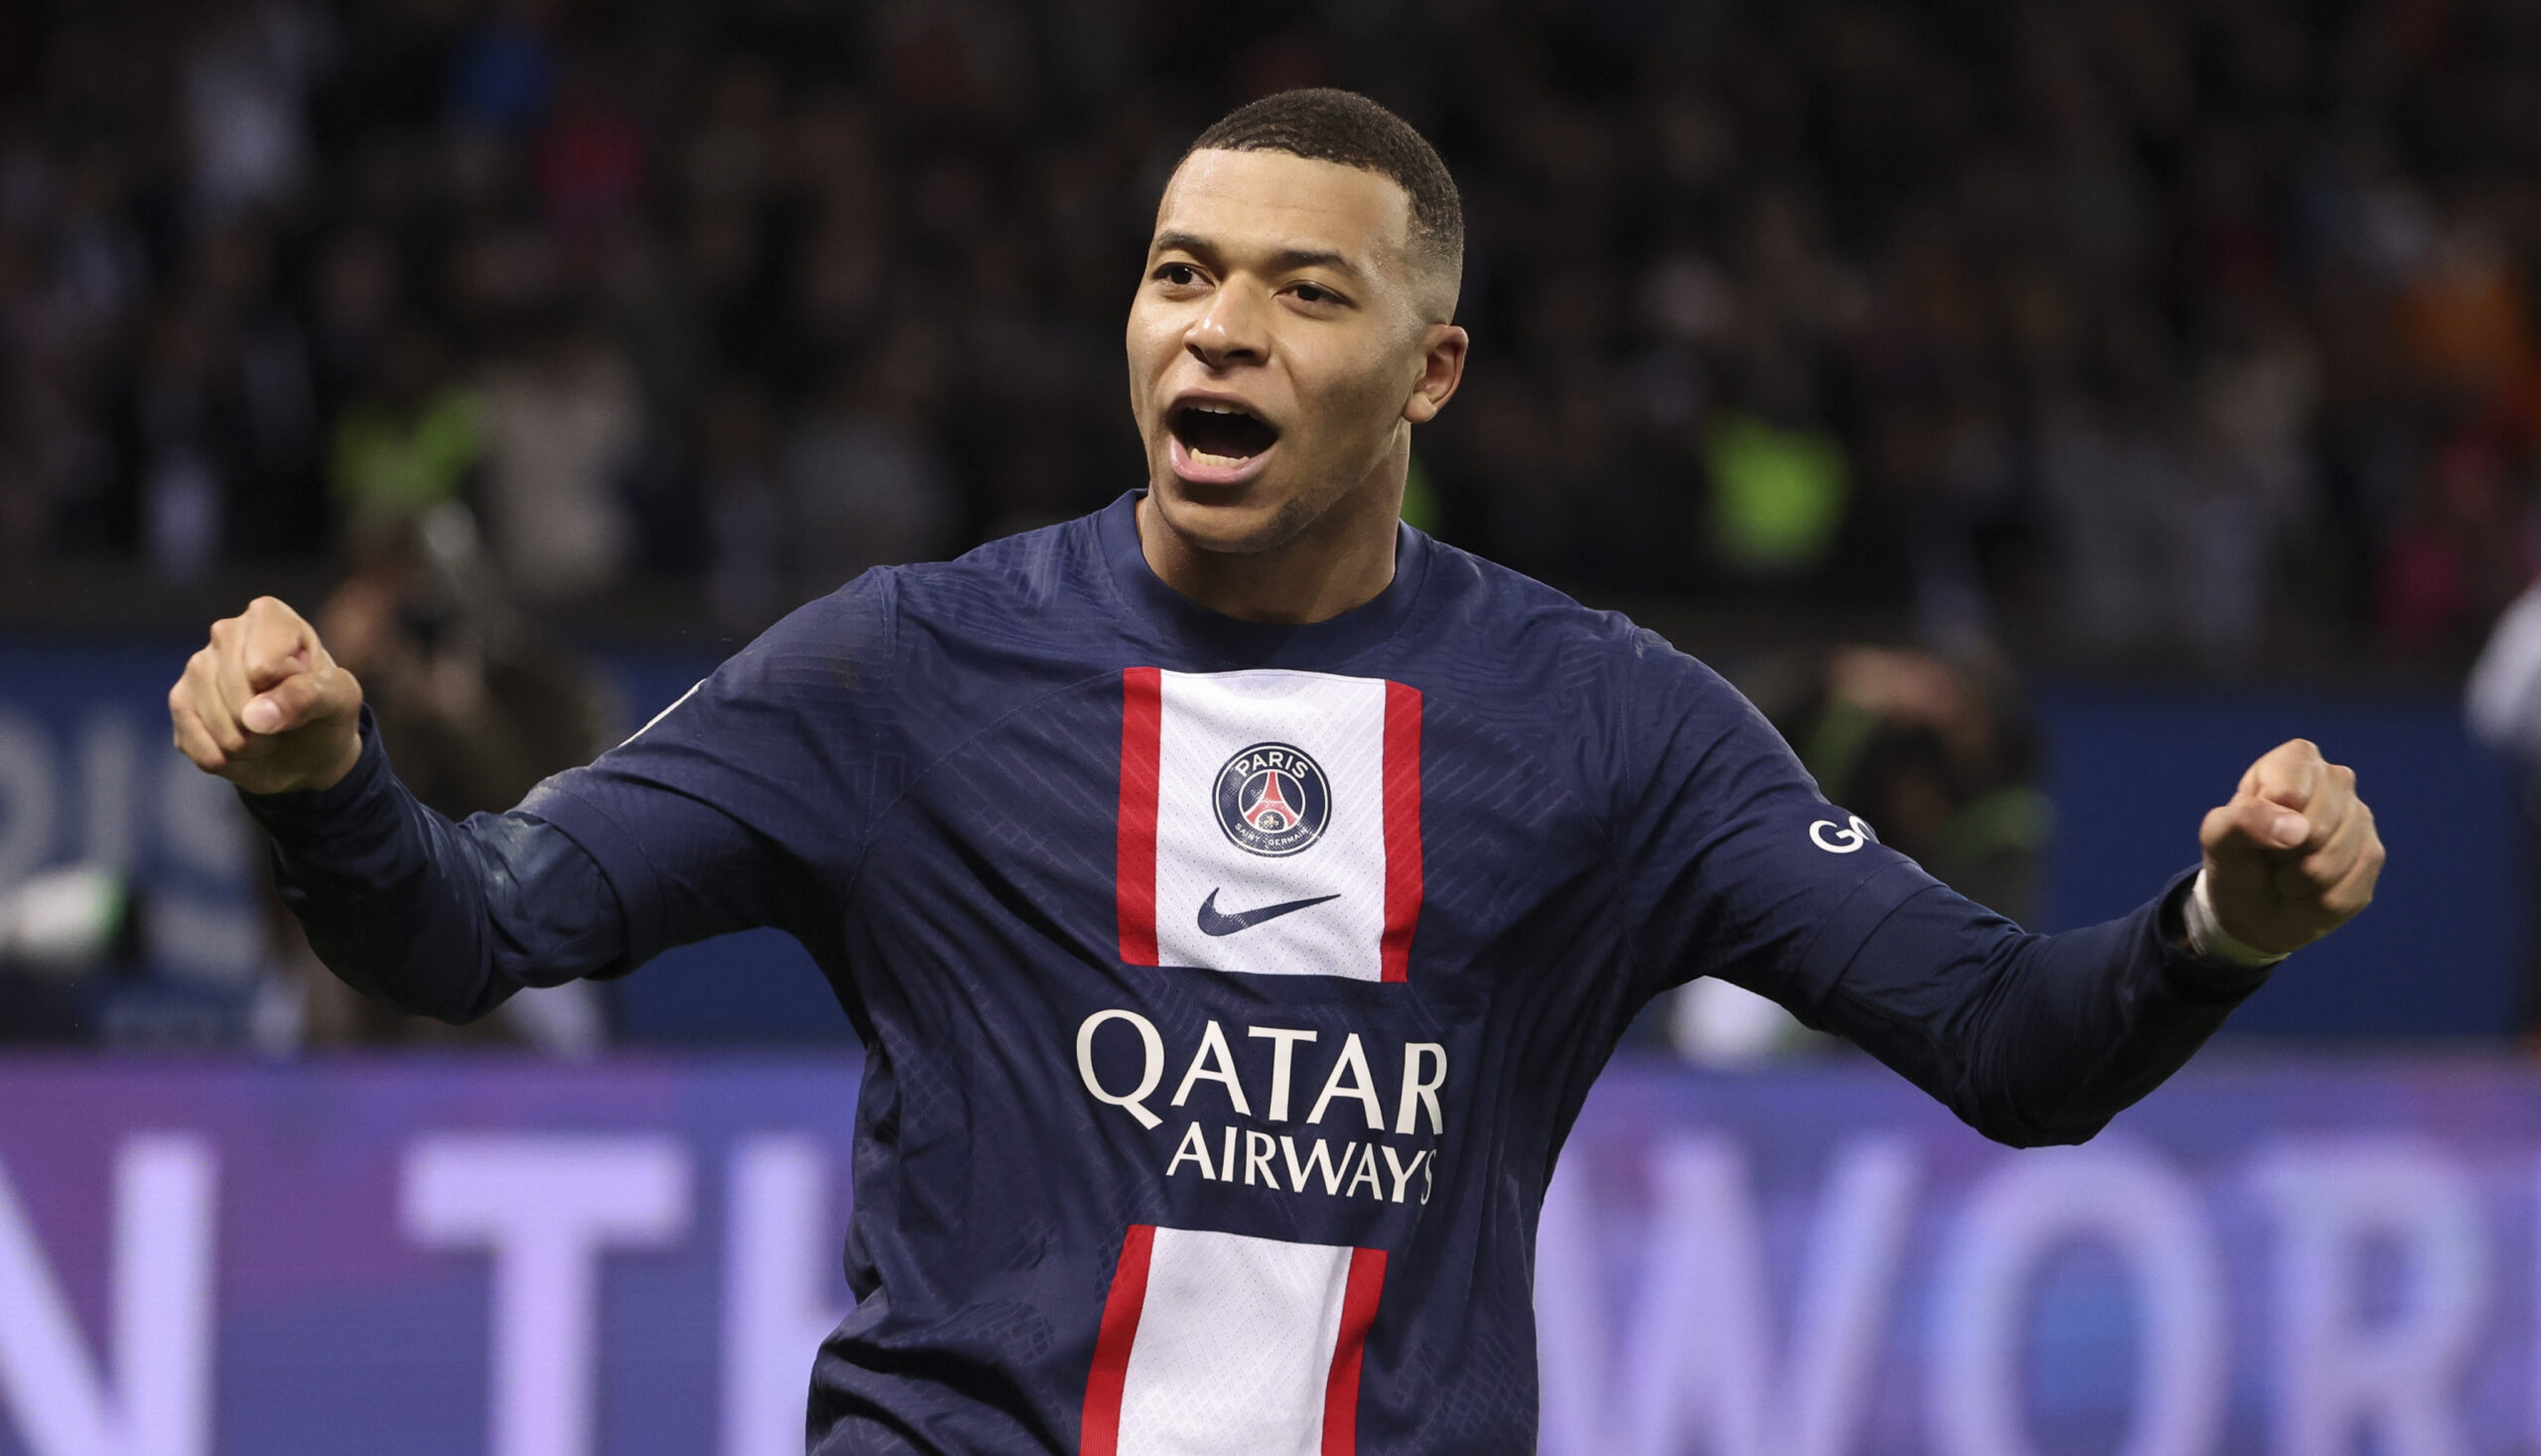 Kylian Mbappe Religion: Is Mbappe Christian or Muslim? - The Sports Mania